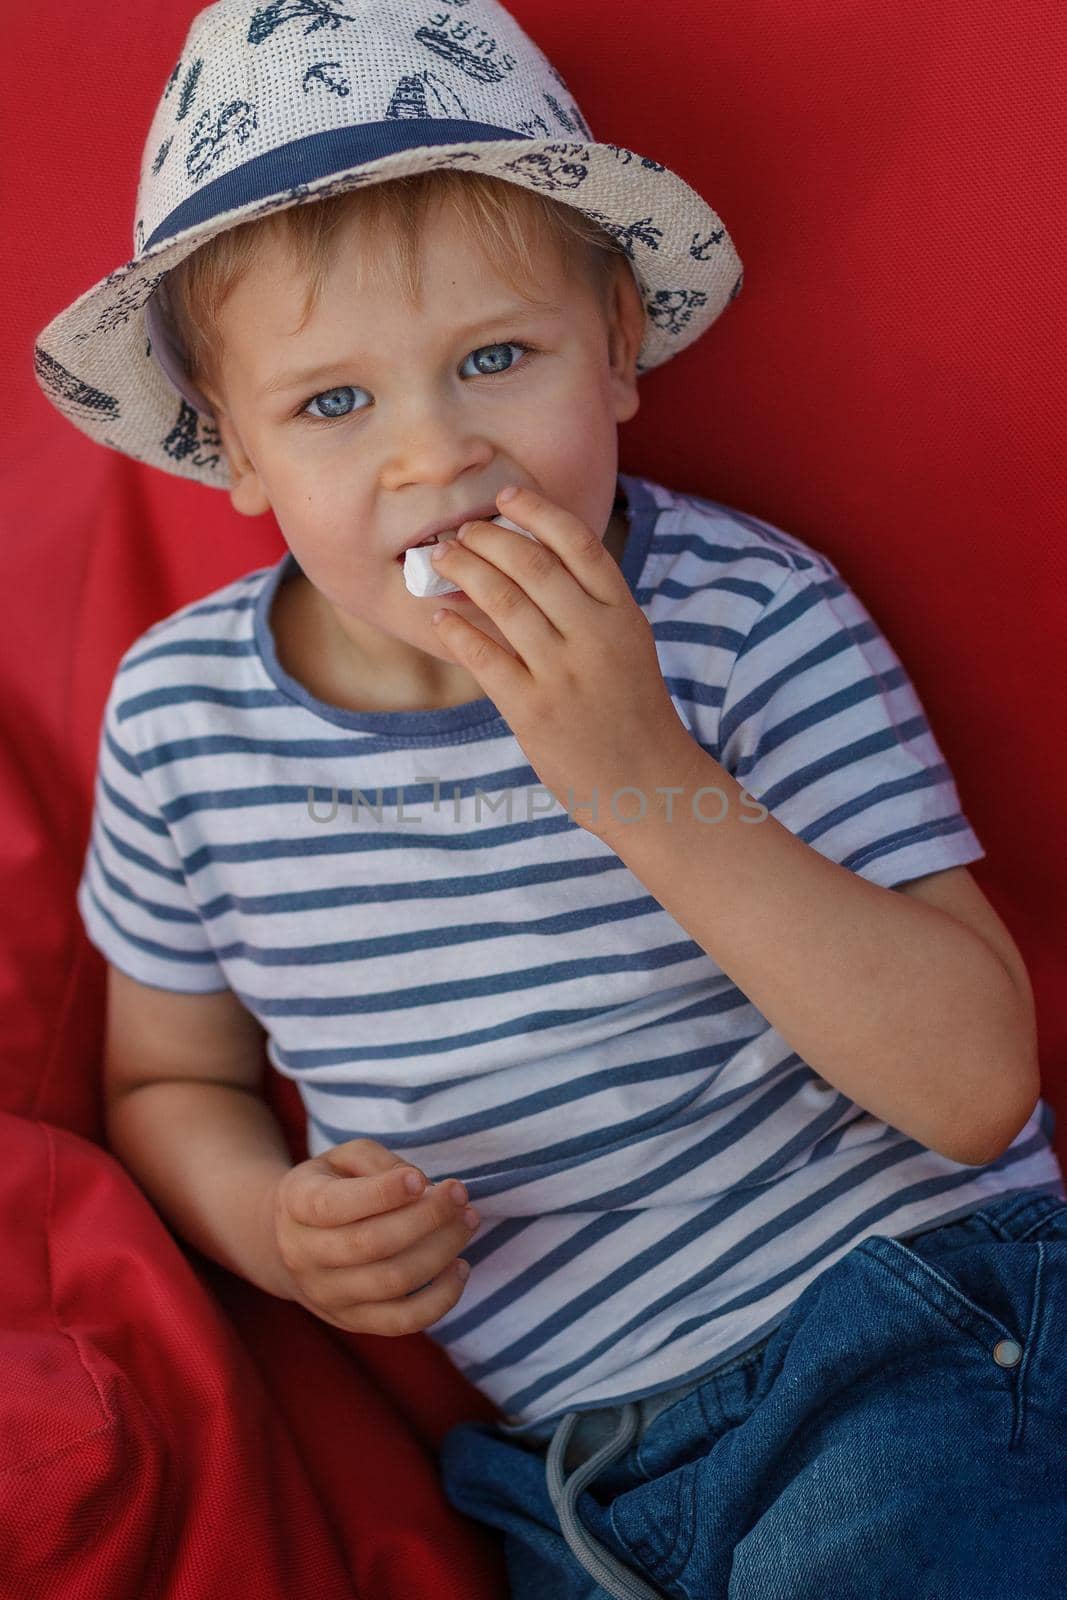 A little boy in a striped shirt is sitting on a red armchair and enjoying candy by Lincikas